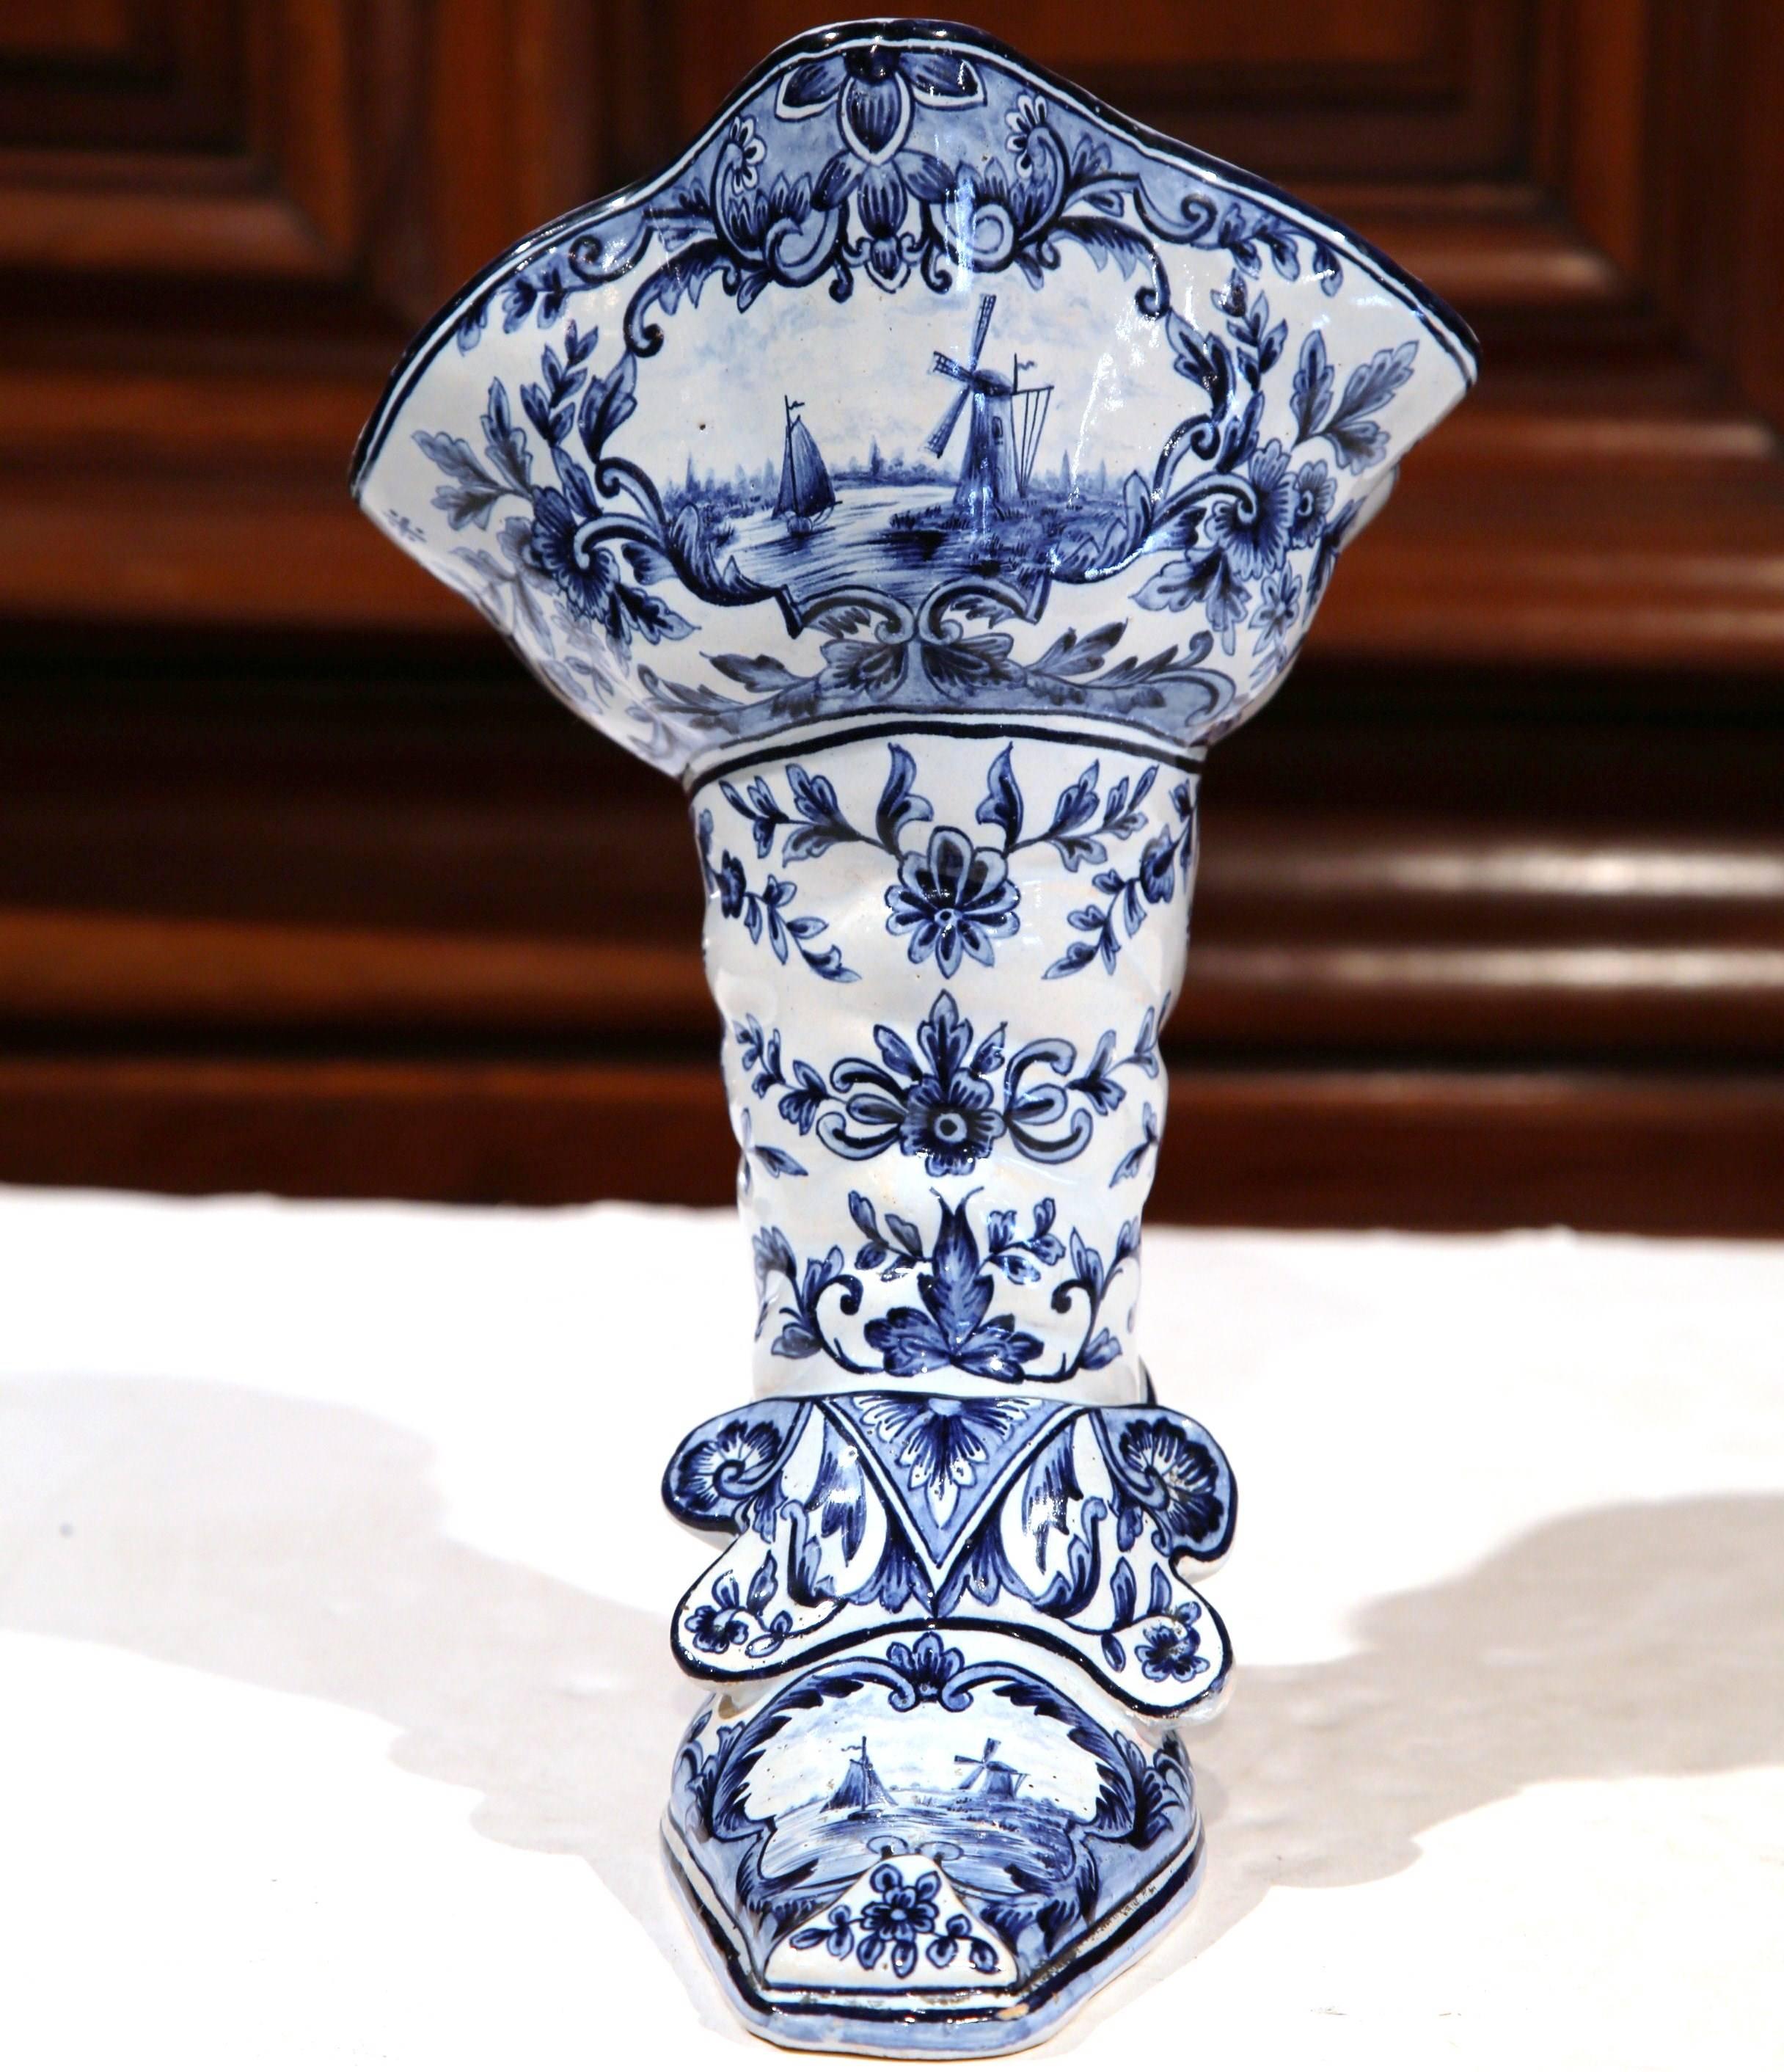 French Early 20th Century Hand-Painted Blue and White Vase Shaped as a Boot